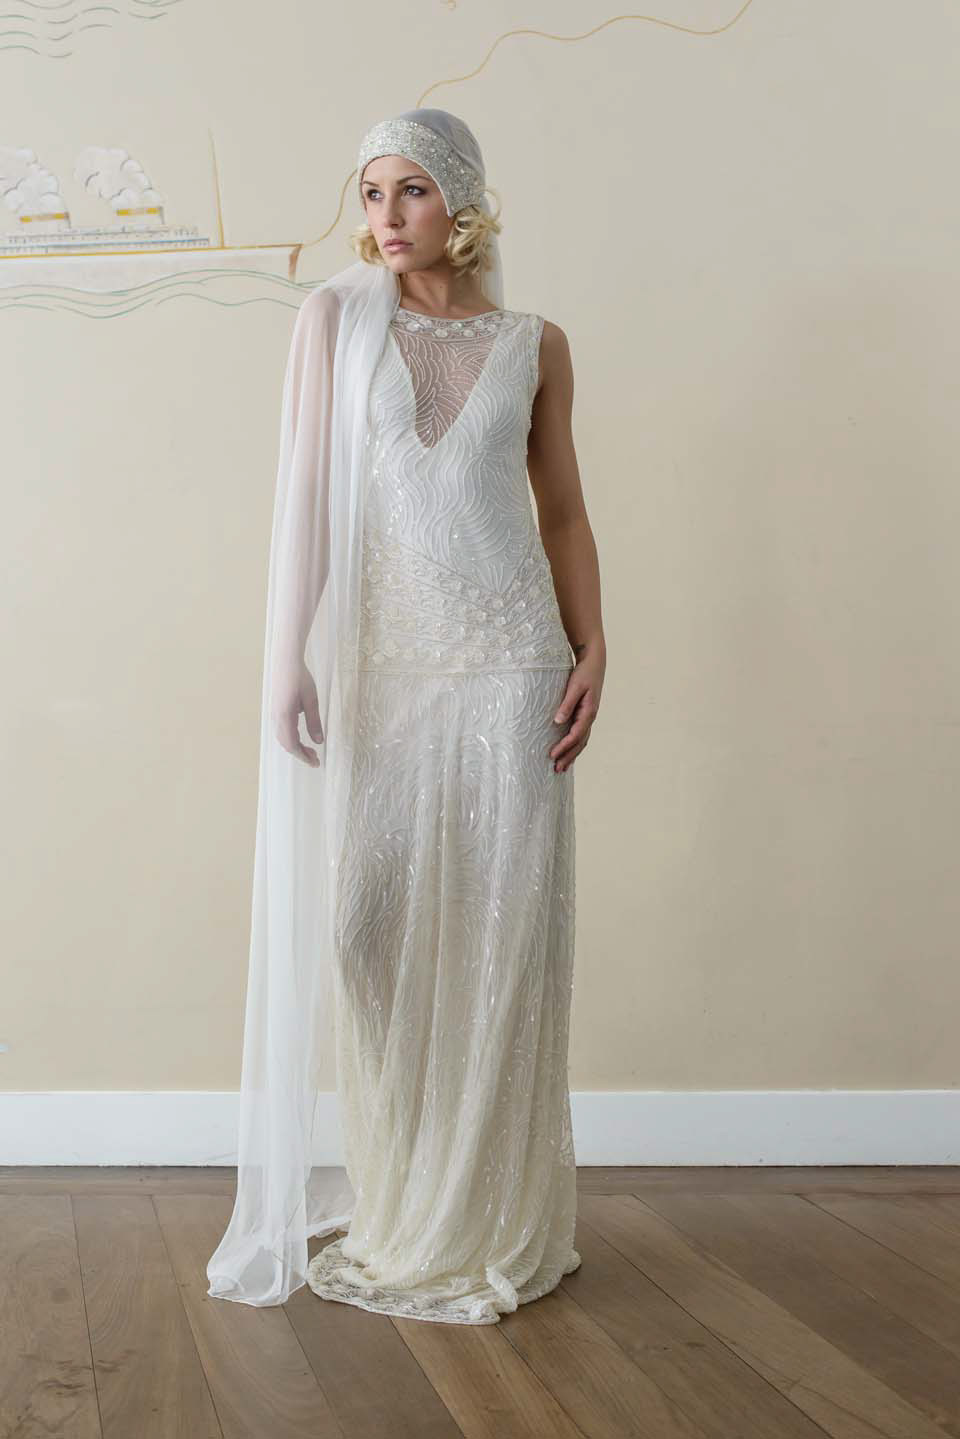 1930 Wedding Dresses
 Vicky Rowe A Debut Collection of 1920s and 1930s Inspired